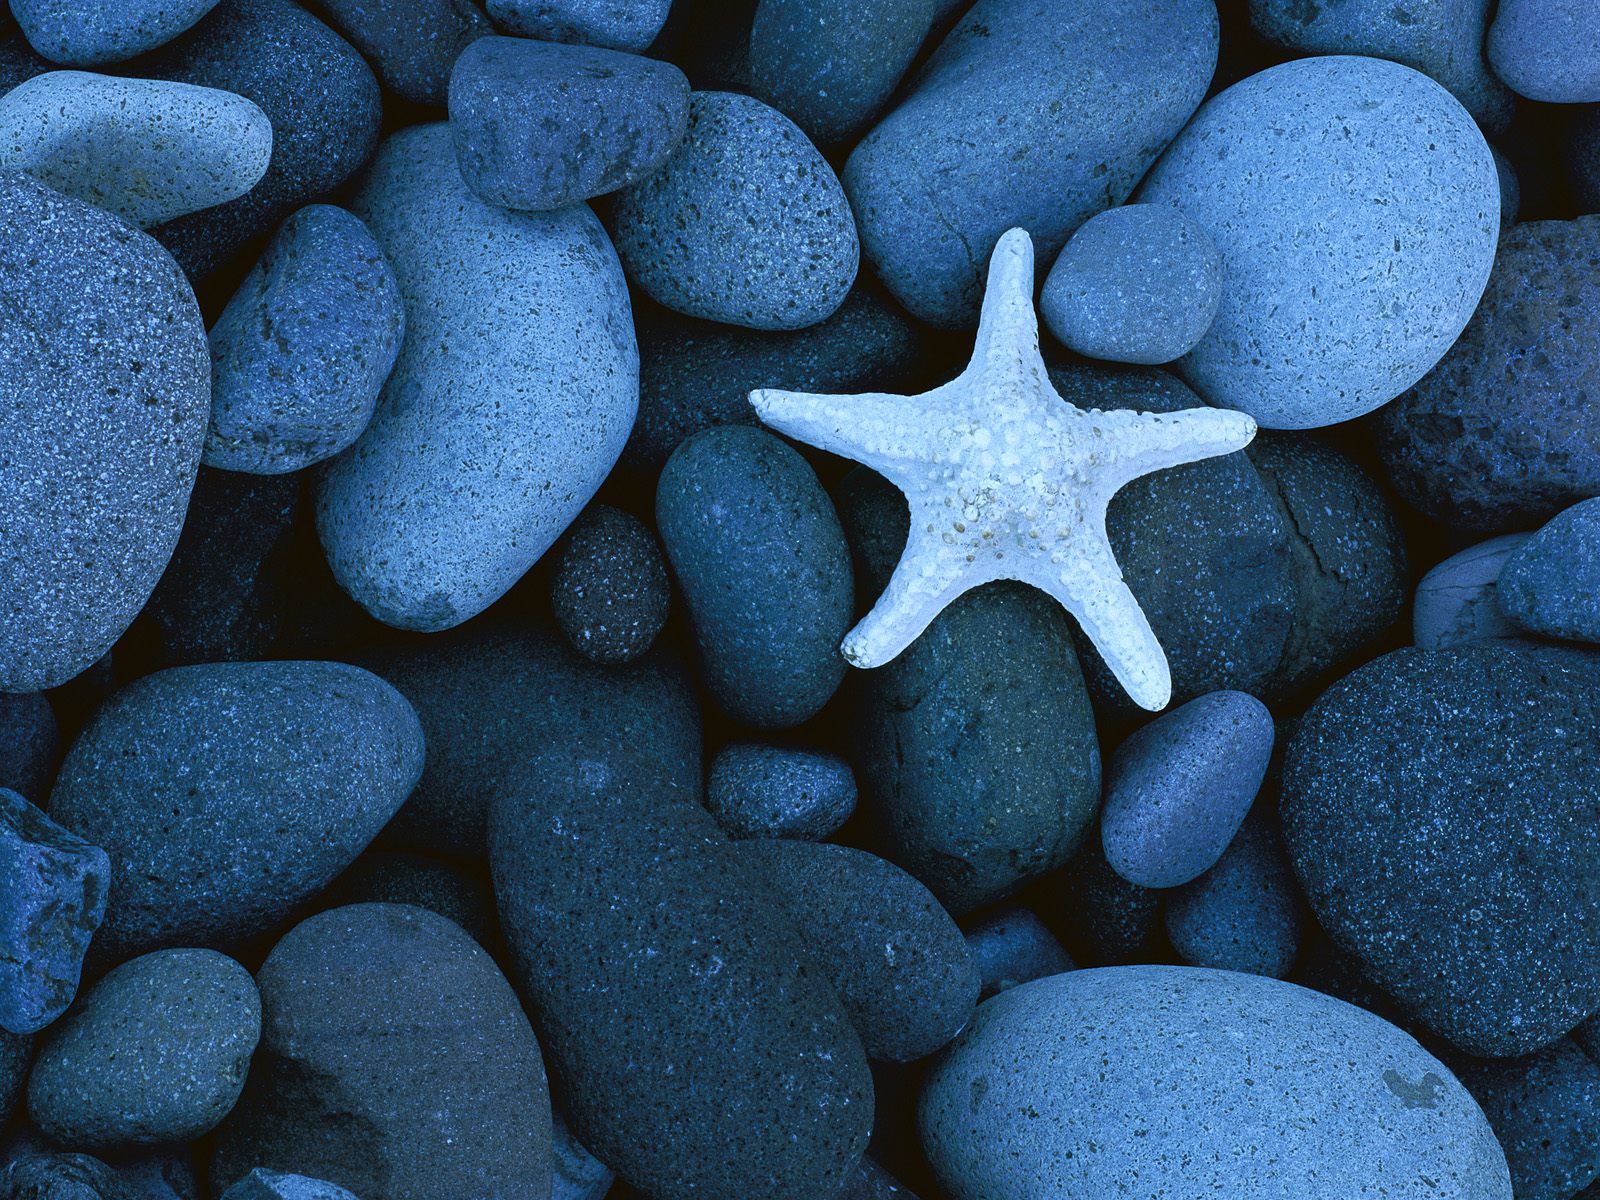 Starfish stones wallpaper - High Quality and other